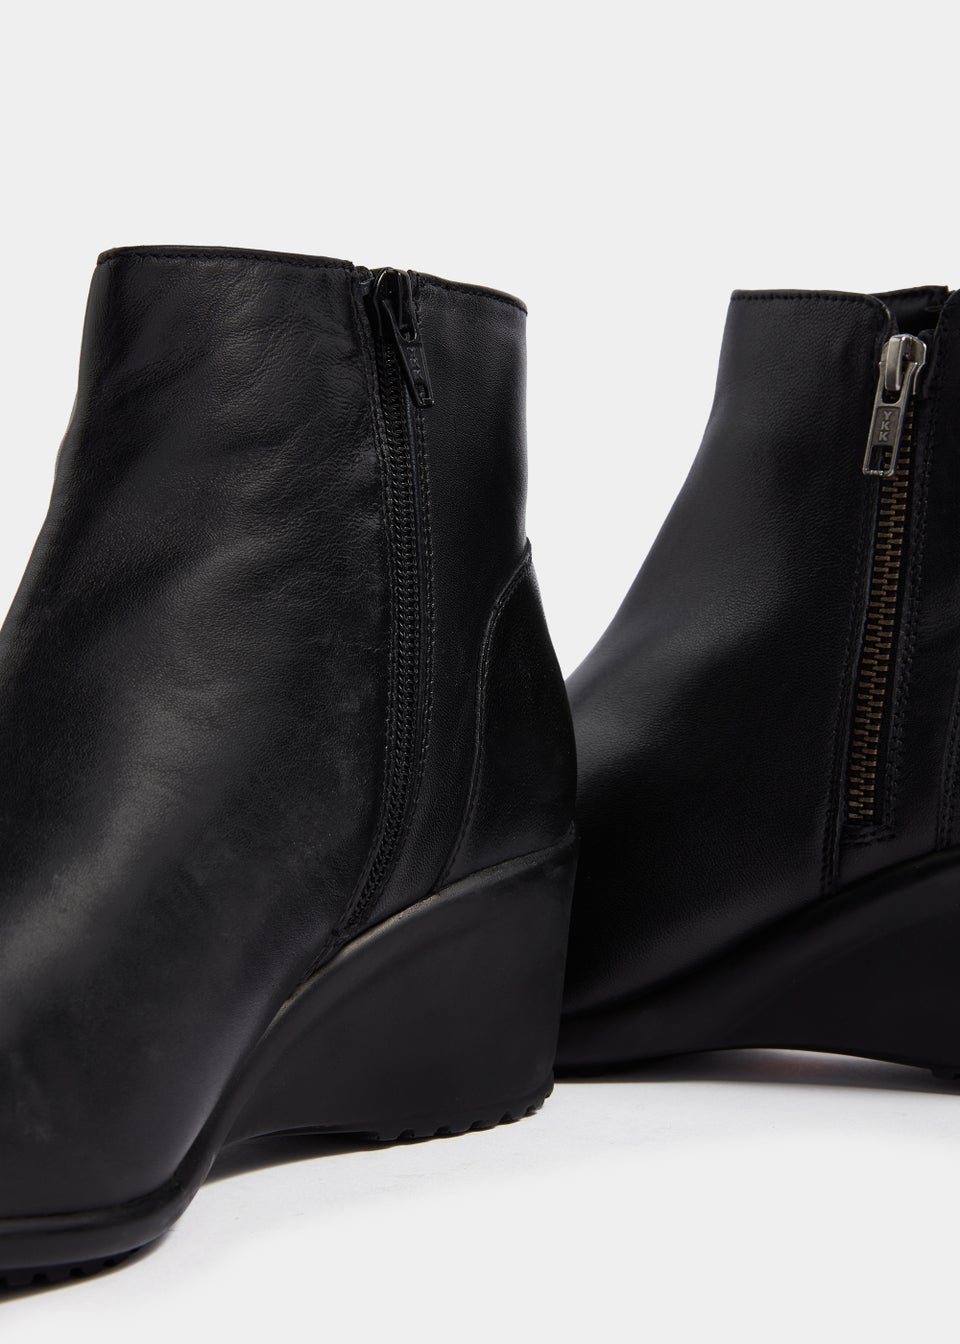 Soleflex Black Real Leather Wedge Boots - Matalan